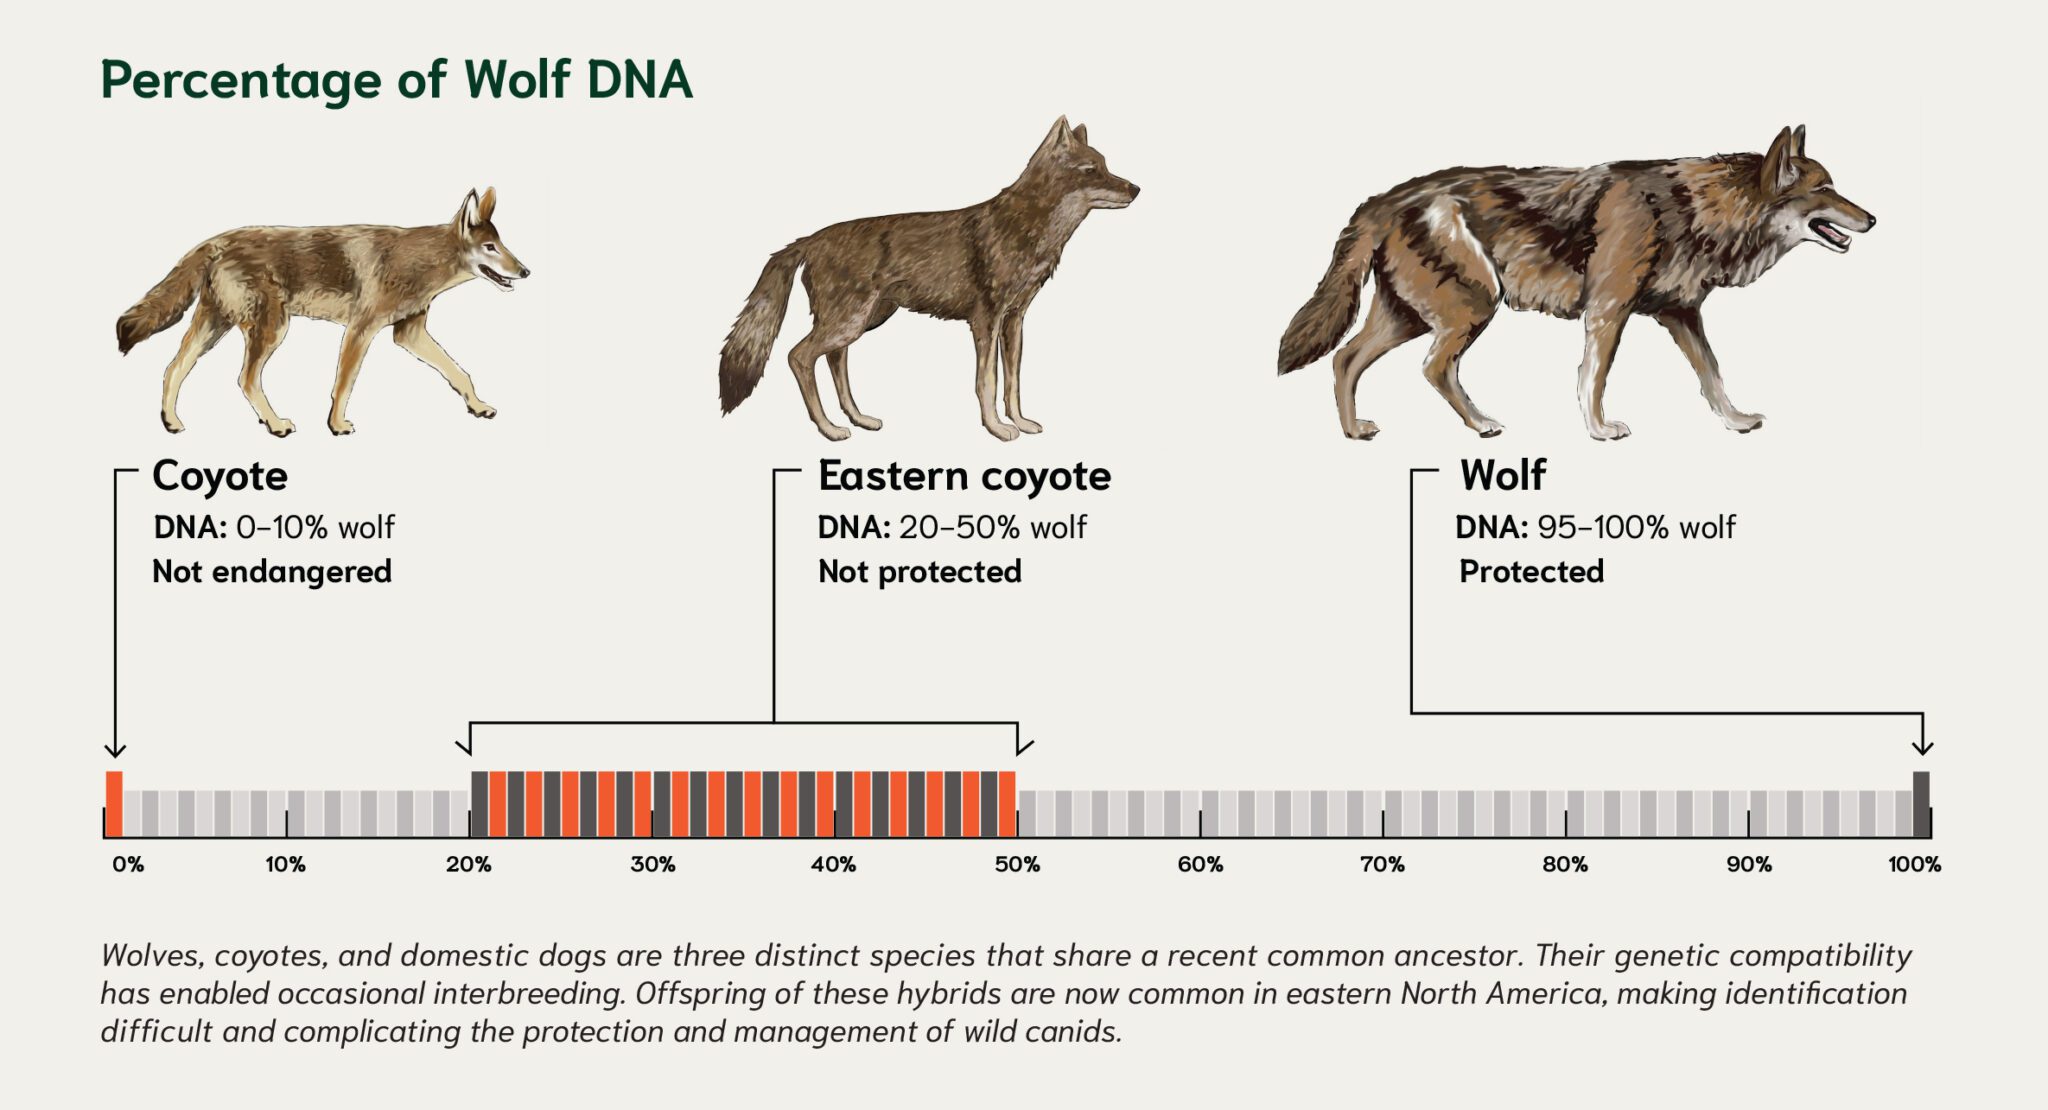 Graphic courtesy of the New York State Museum in Albany for its exhibit: "Canine Contrasts: Unraveling Wolves and Coyotes in New York."